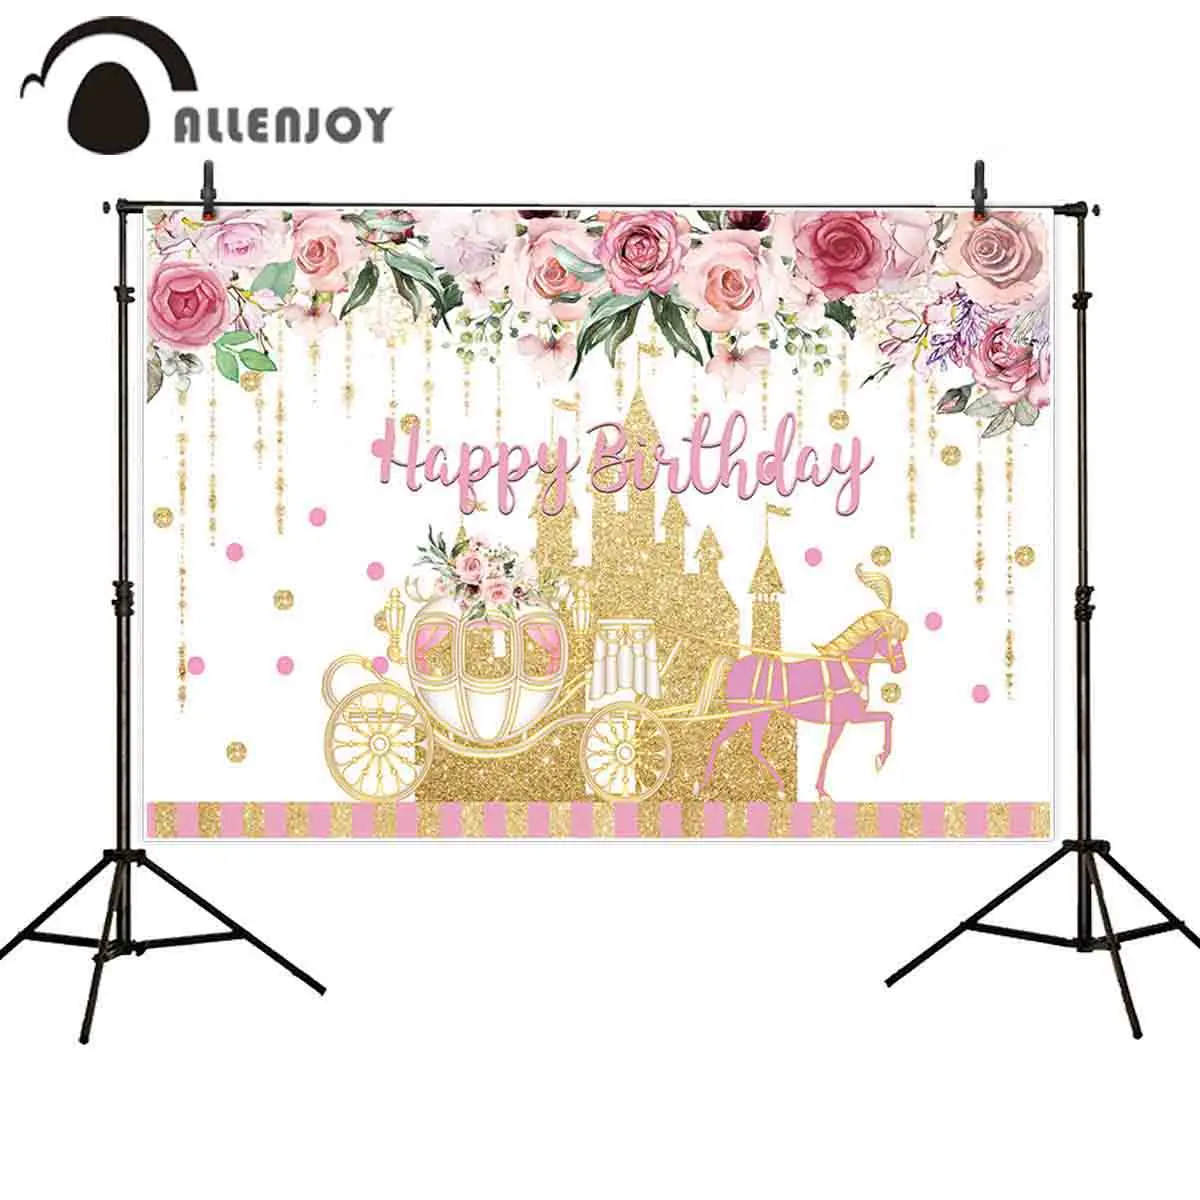 Allenjoy photography photo backdrops Golden castle carriage flowers girl birthday background photocall boda fabric photophone